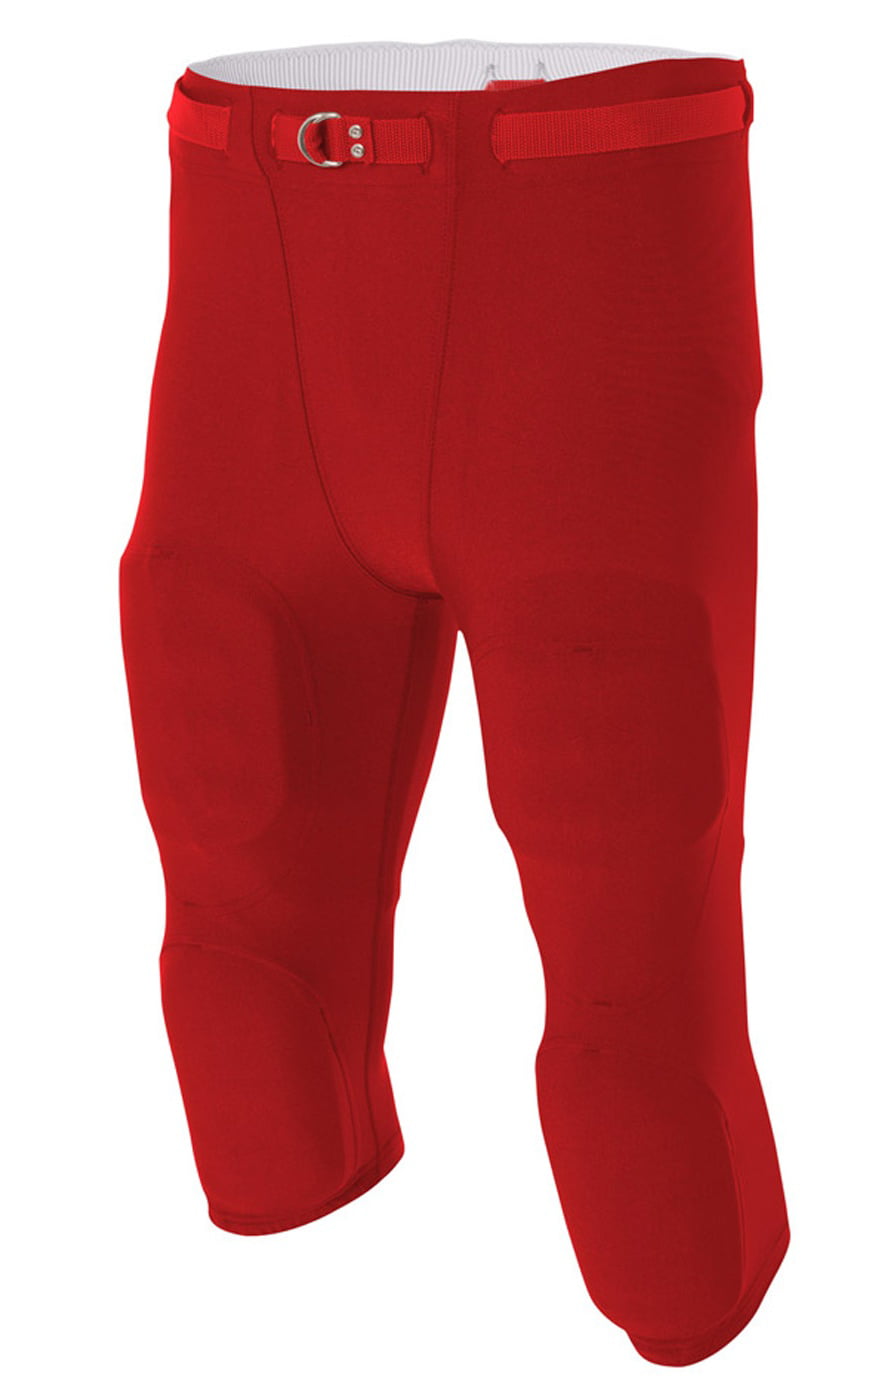 Knee Flyless Moisture Wicking with Built-in Hip Football Integrated 7-Pads Pants 9 Colors in 8 Sizes Thigh & Tail Pads 